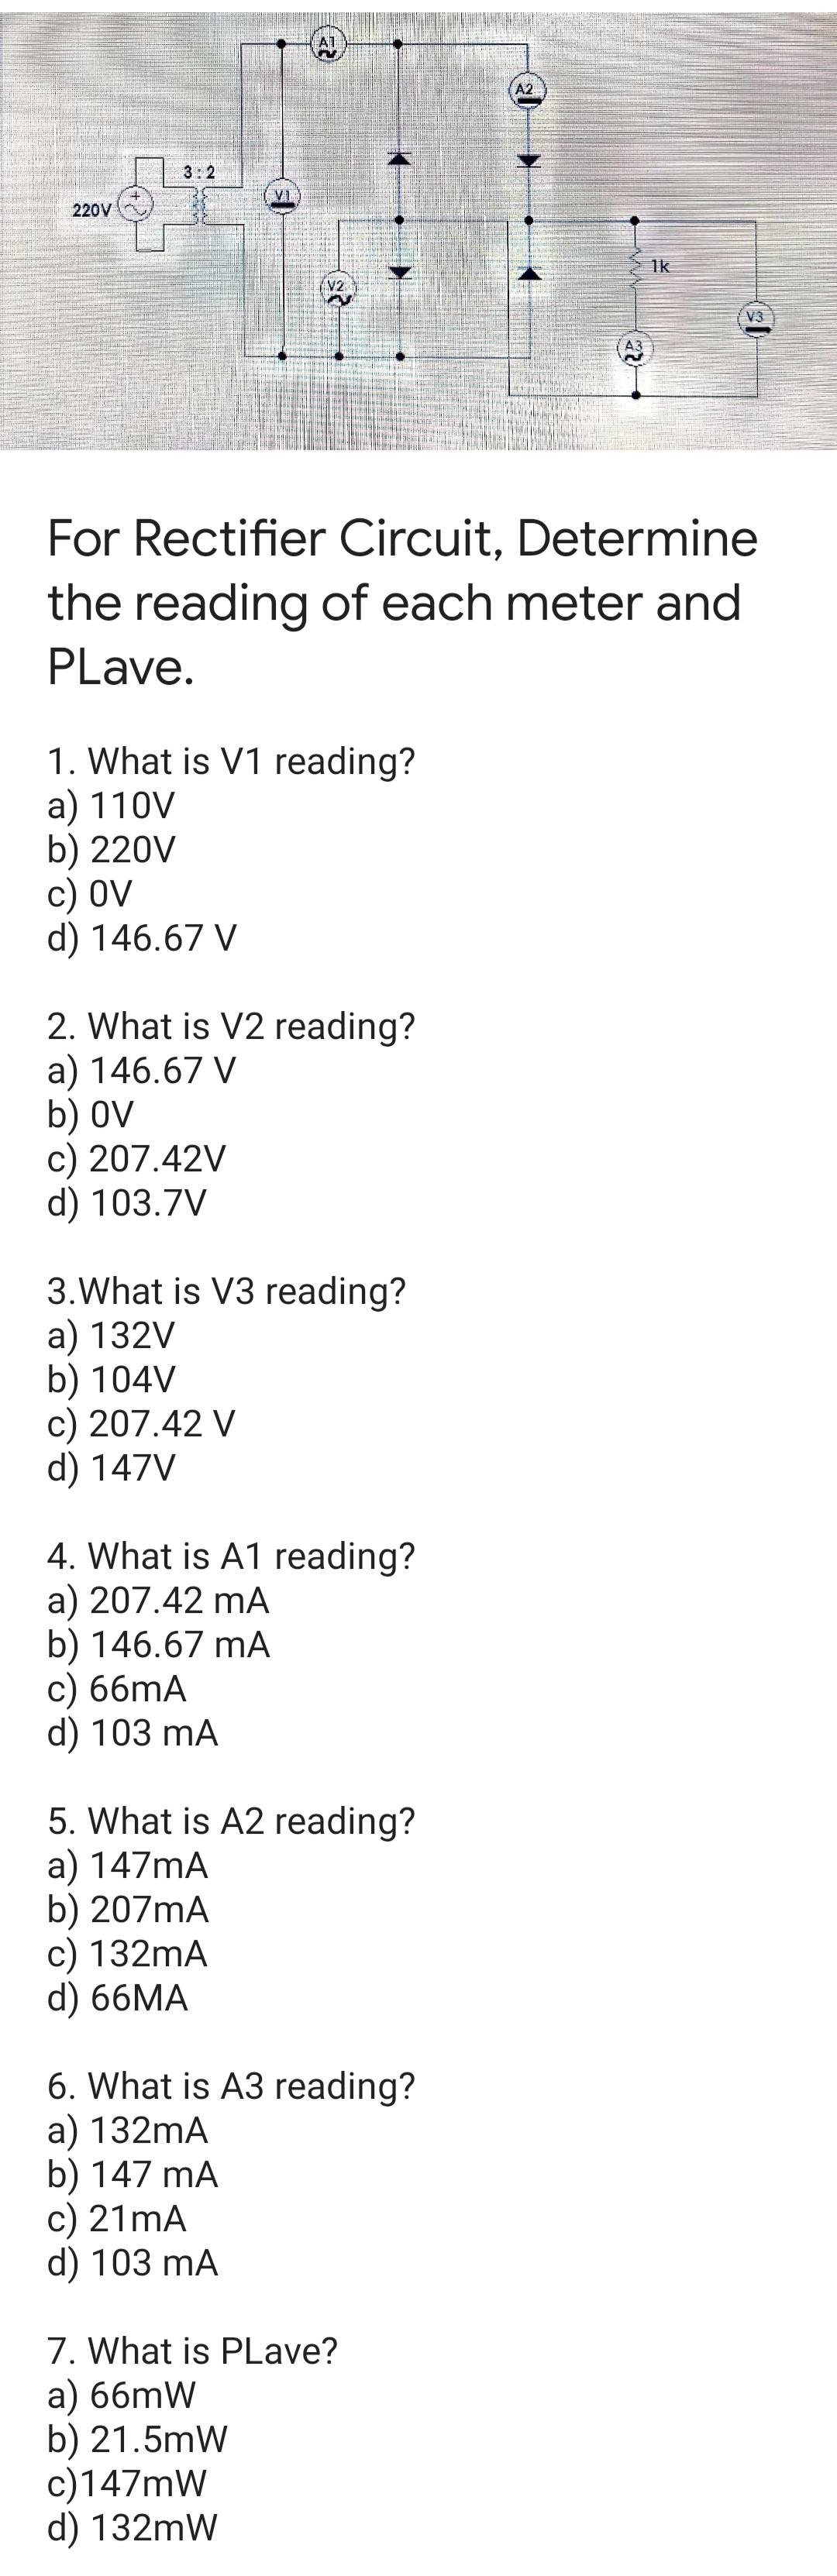 A2
3:2
V1
220V
1k
(V2
A3
For Rectifier Circuit, Determine
the reading of each meter and
PLave.
1. What is V1 reading?
a) 110V
b) 220V
с) OV
d) 146.67 V
2. What is V2 reading?
a) 146.67 V
b) OV
c) 207.42V
d) 103.7V
3.What is V3 reading?
a) 132V
b) 104V
c) 207.42 V
d) 147V
4. What is A1 reading?
a) 207.42 mA
b) 146.67 mA
c) 66mA
d) 103 mA
5. What is A2 reading?
a) 147mA
b) 207mA
c) 132mA
d) 66MA
6. What is A3 reading?
a) 132mA
b) 147 mA
c) 21mA
d) 103 mA
7. What is PLave?
a) 66mW
b) 21.5mW
c)147mW
d) 132mW
(2)
(++
